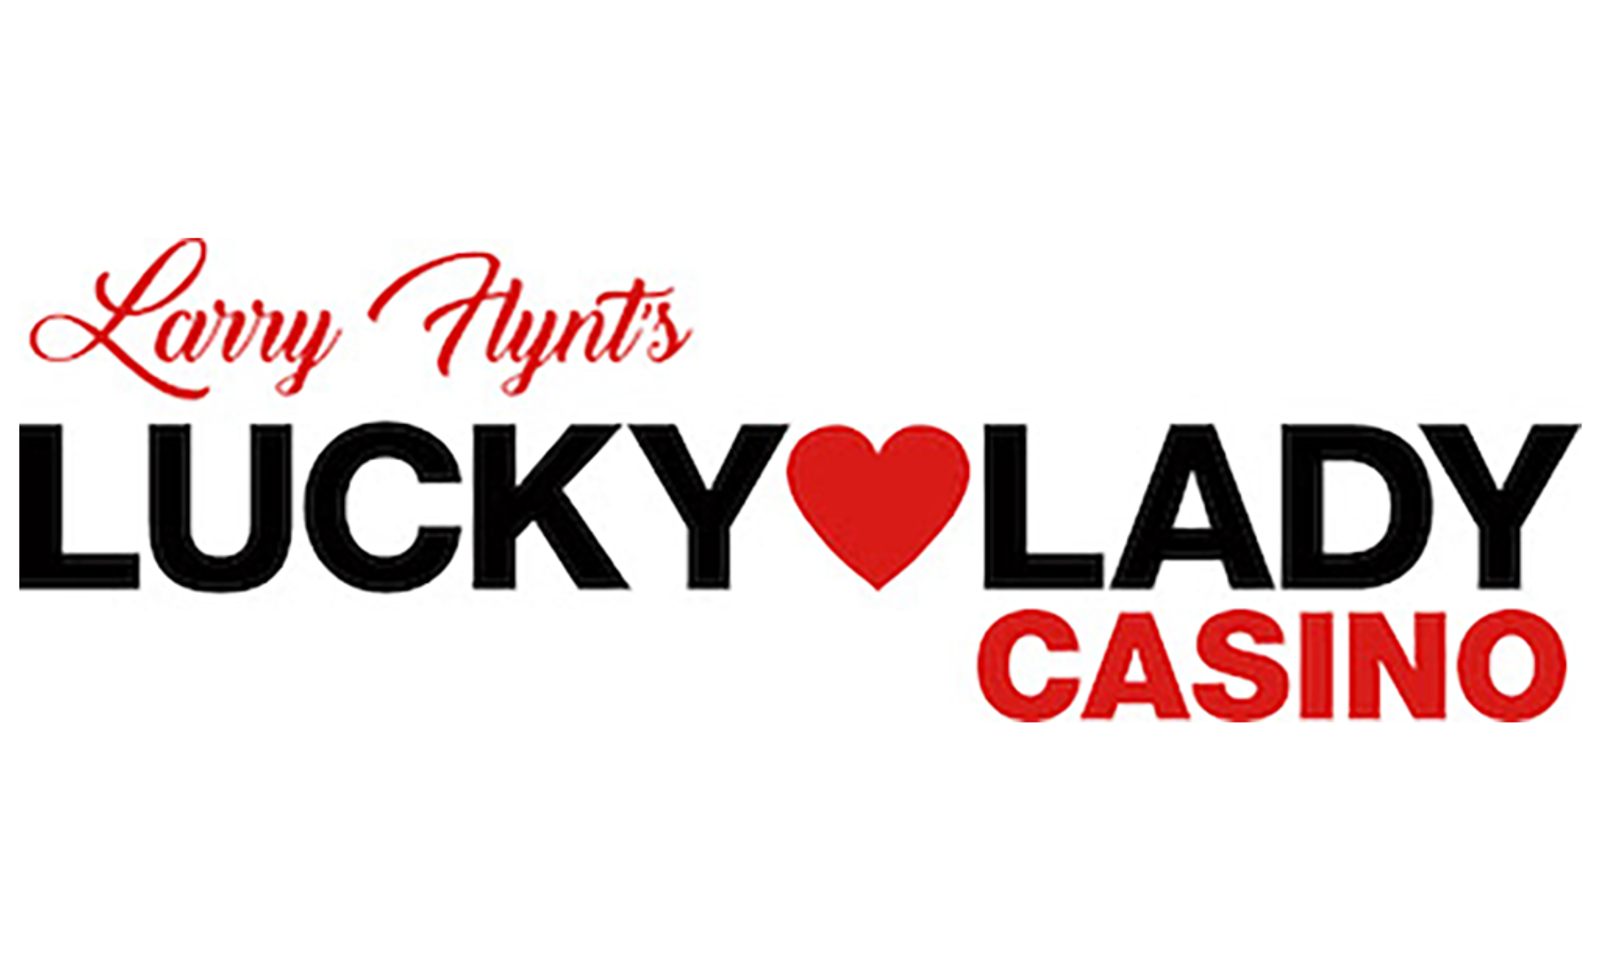 Lucky Lady Casino Announces Need for Full & Part-Time Workers